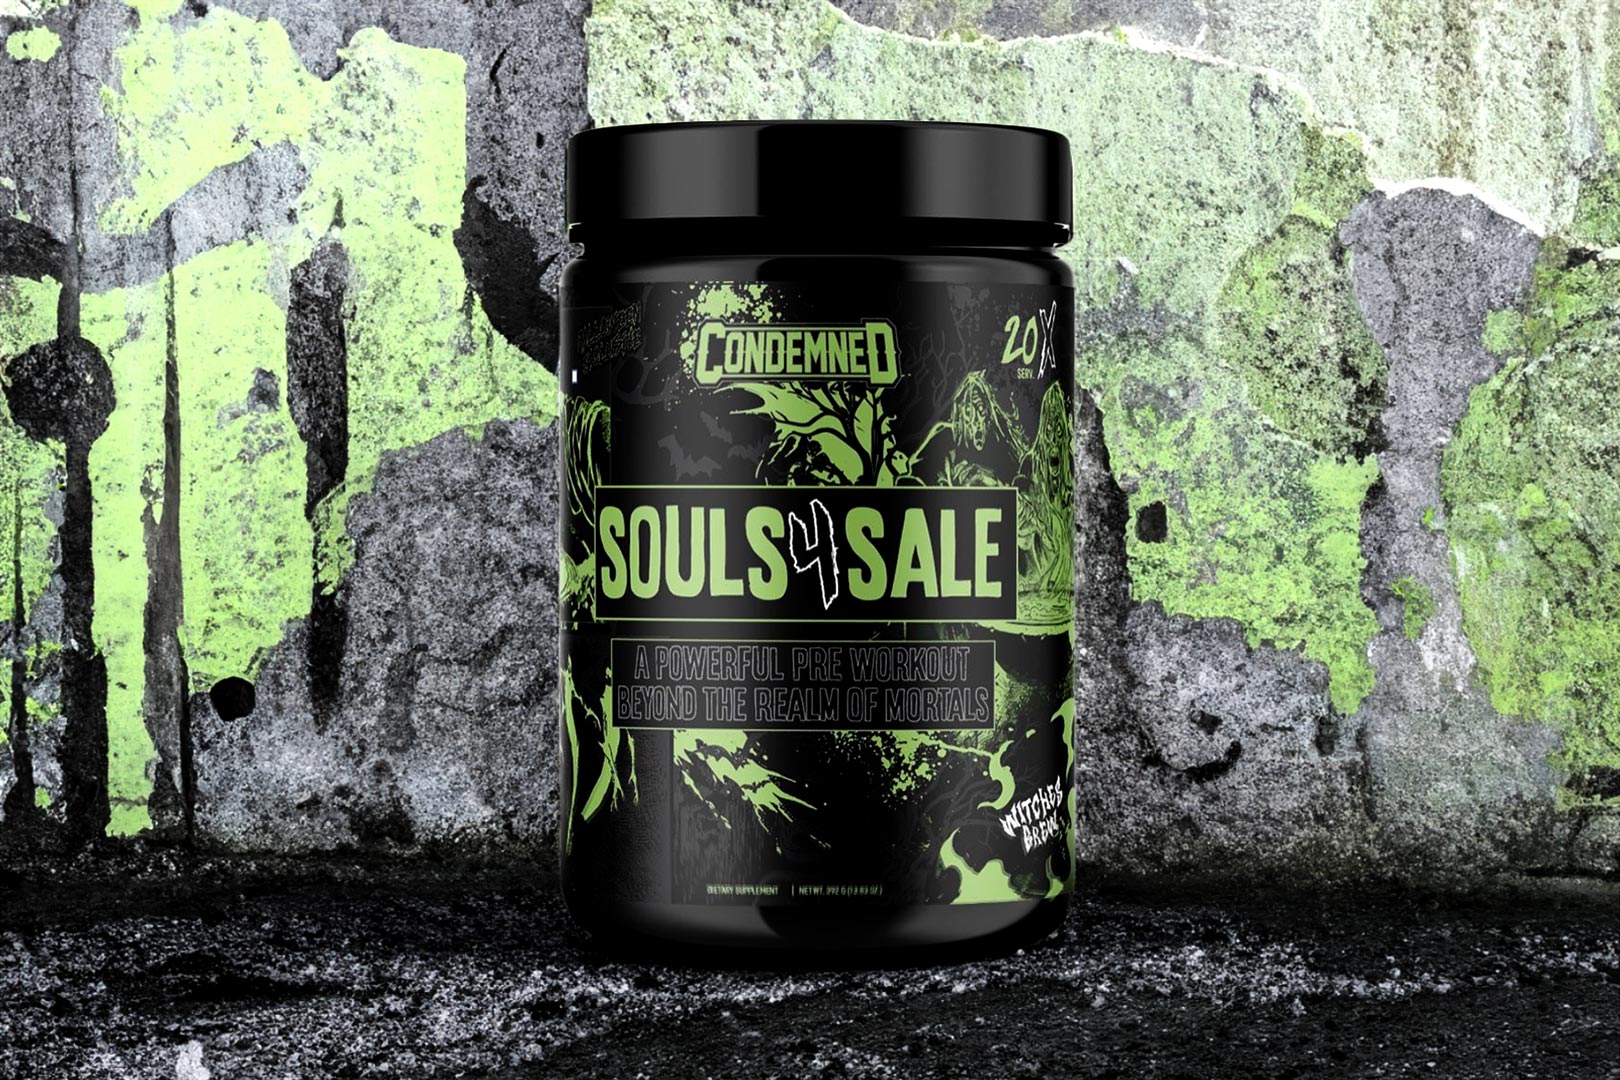 Condemned Labz Previews Halloween Edition Souls4sale